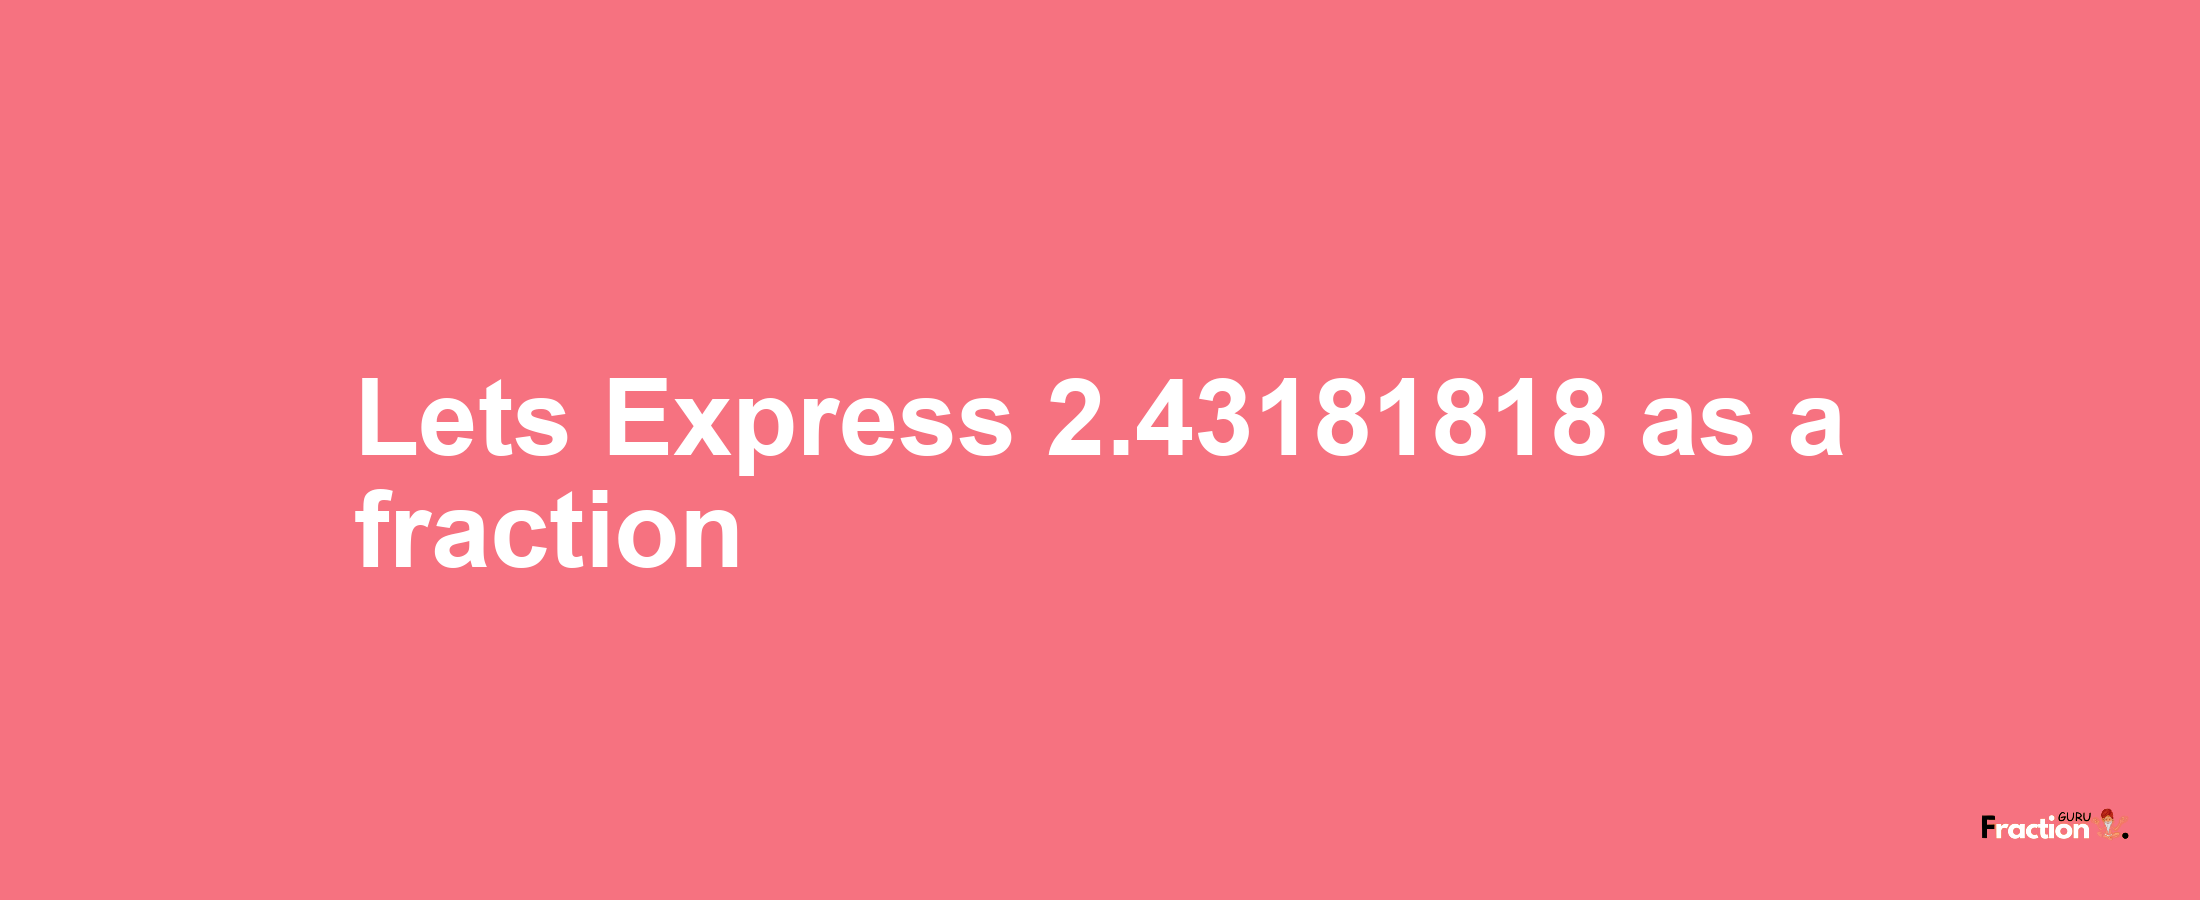 Lets Express 2.43181818 as afraction